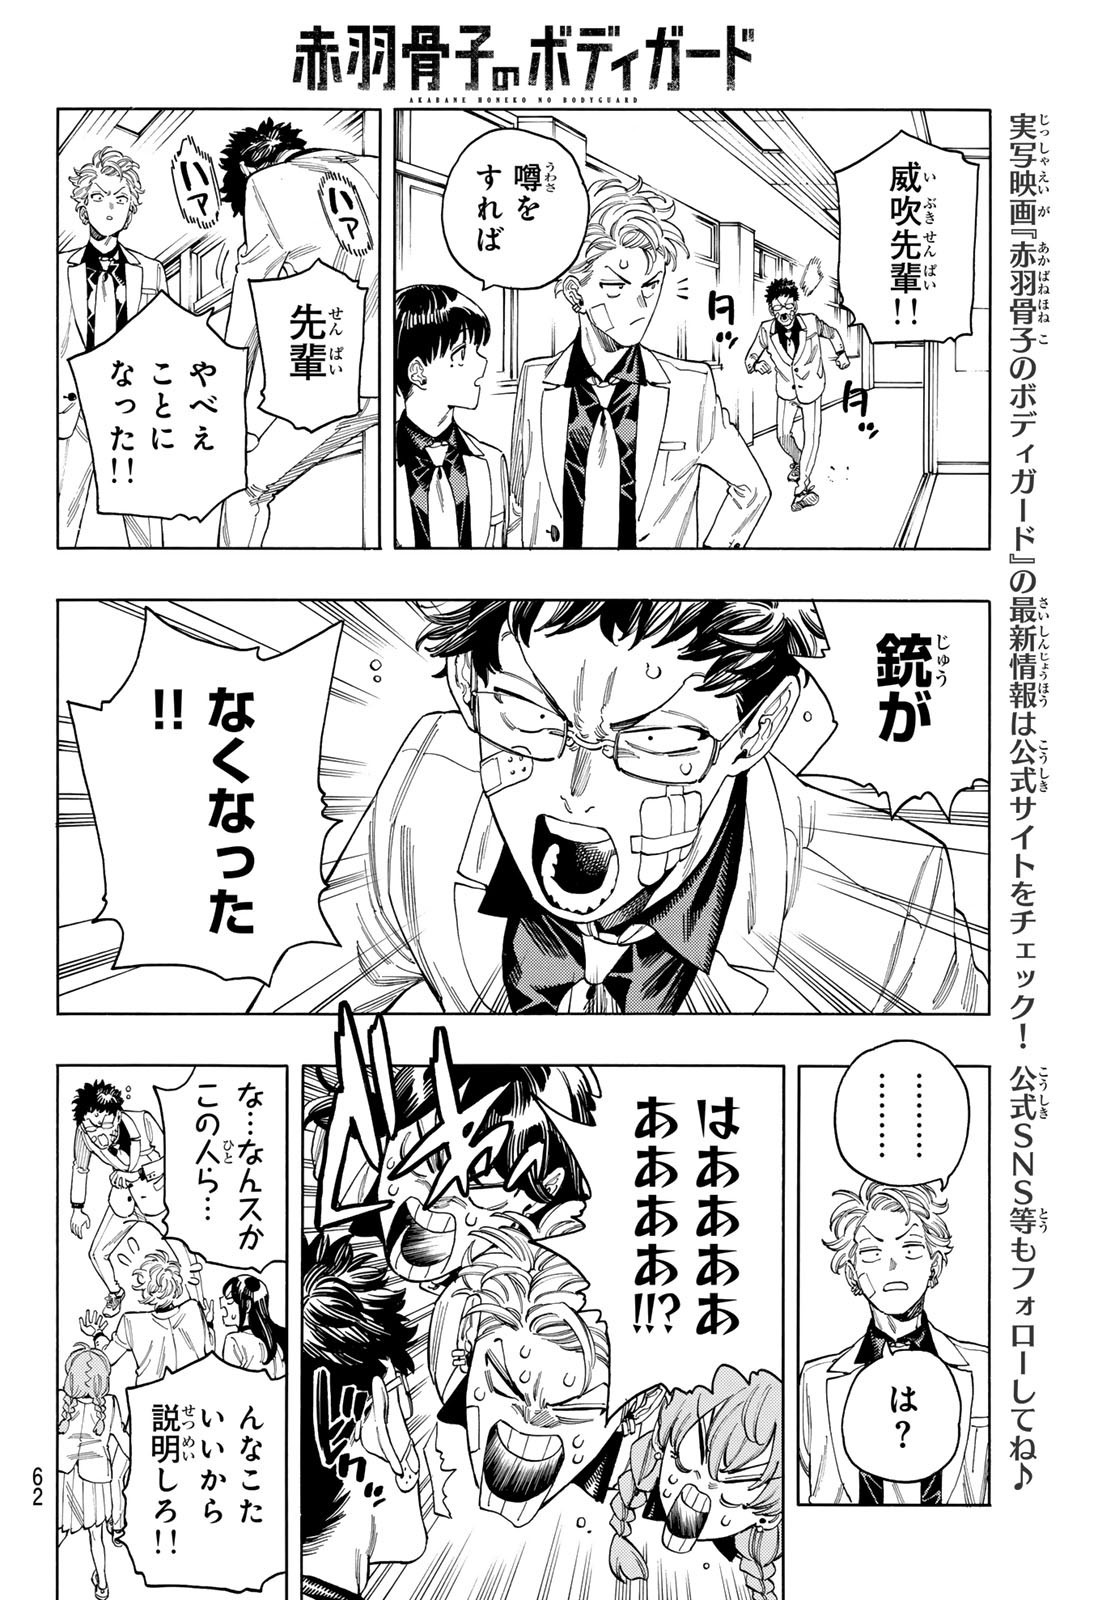 Weekly Shōnen Magazine - 週刊少年マガジン - Chapter 2024-24 - Page 62